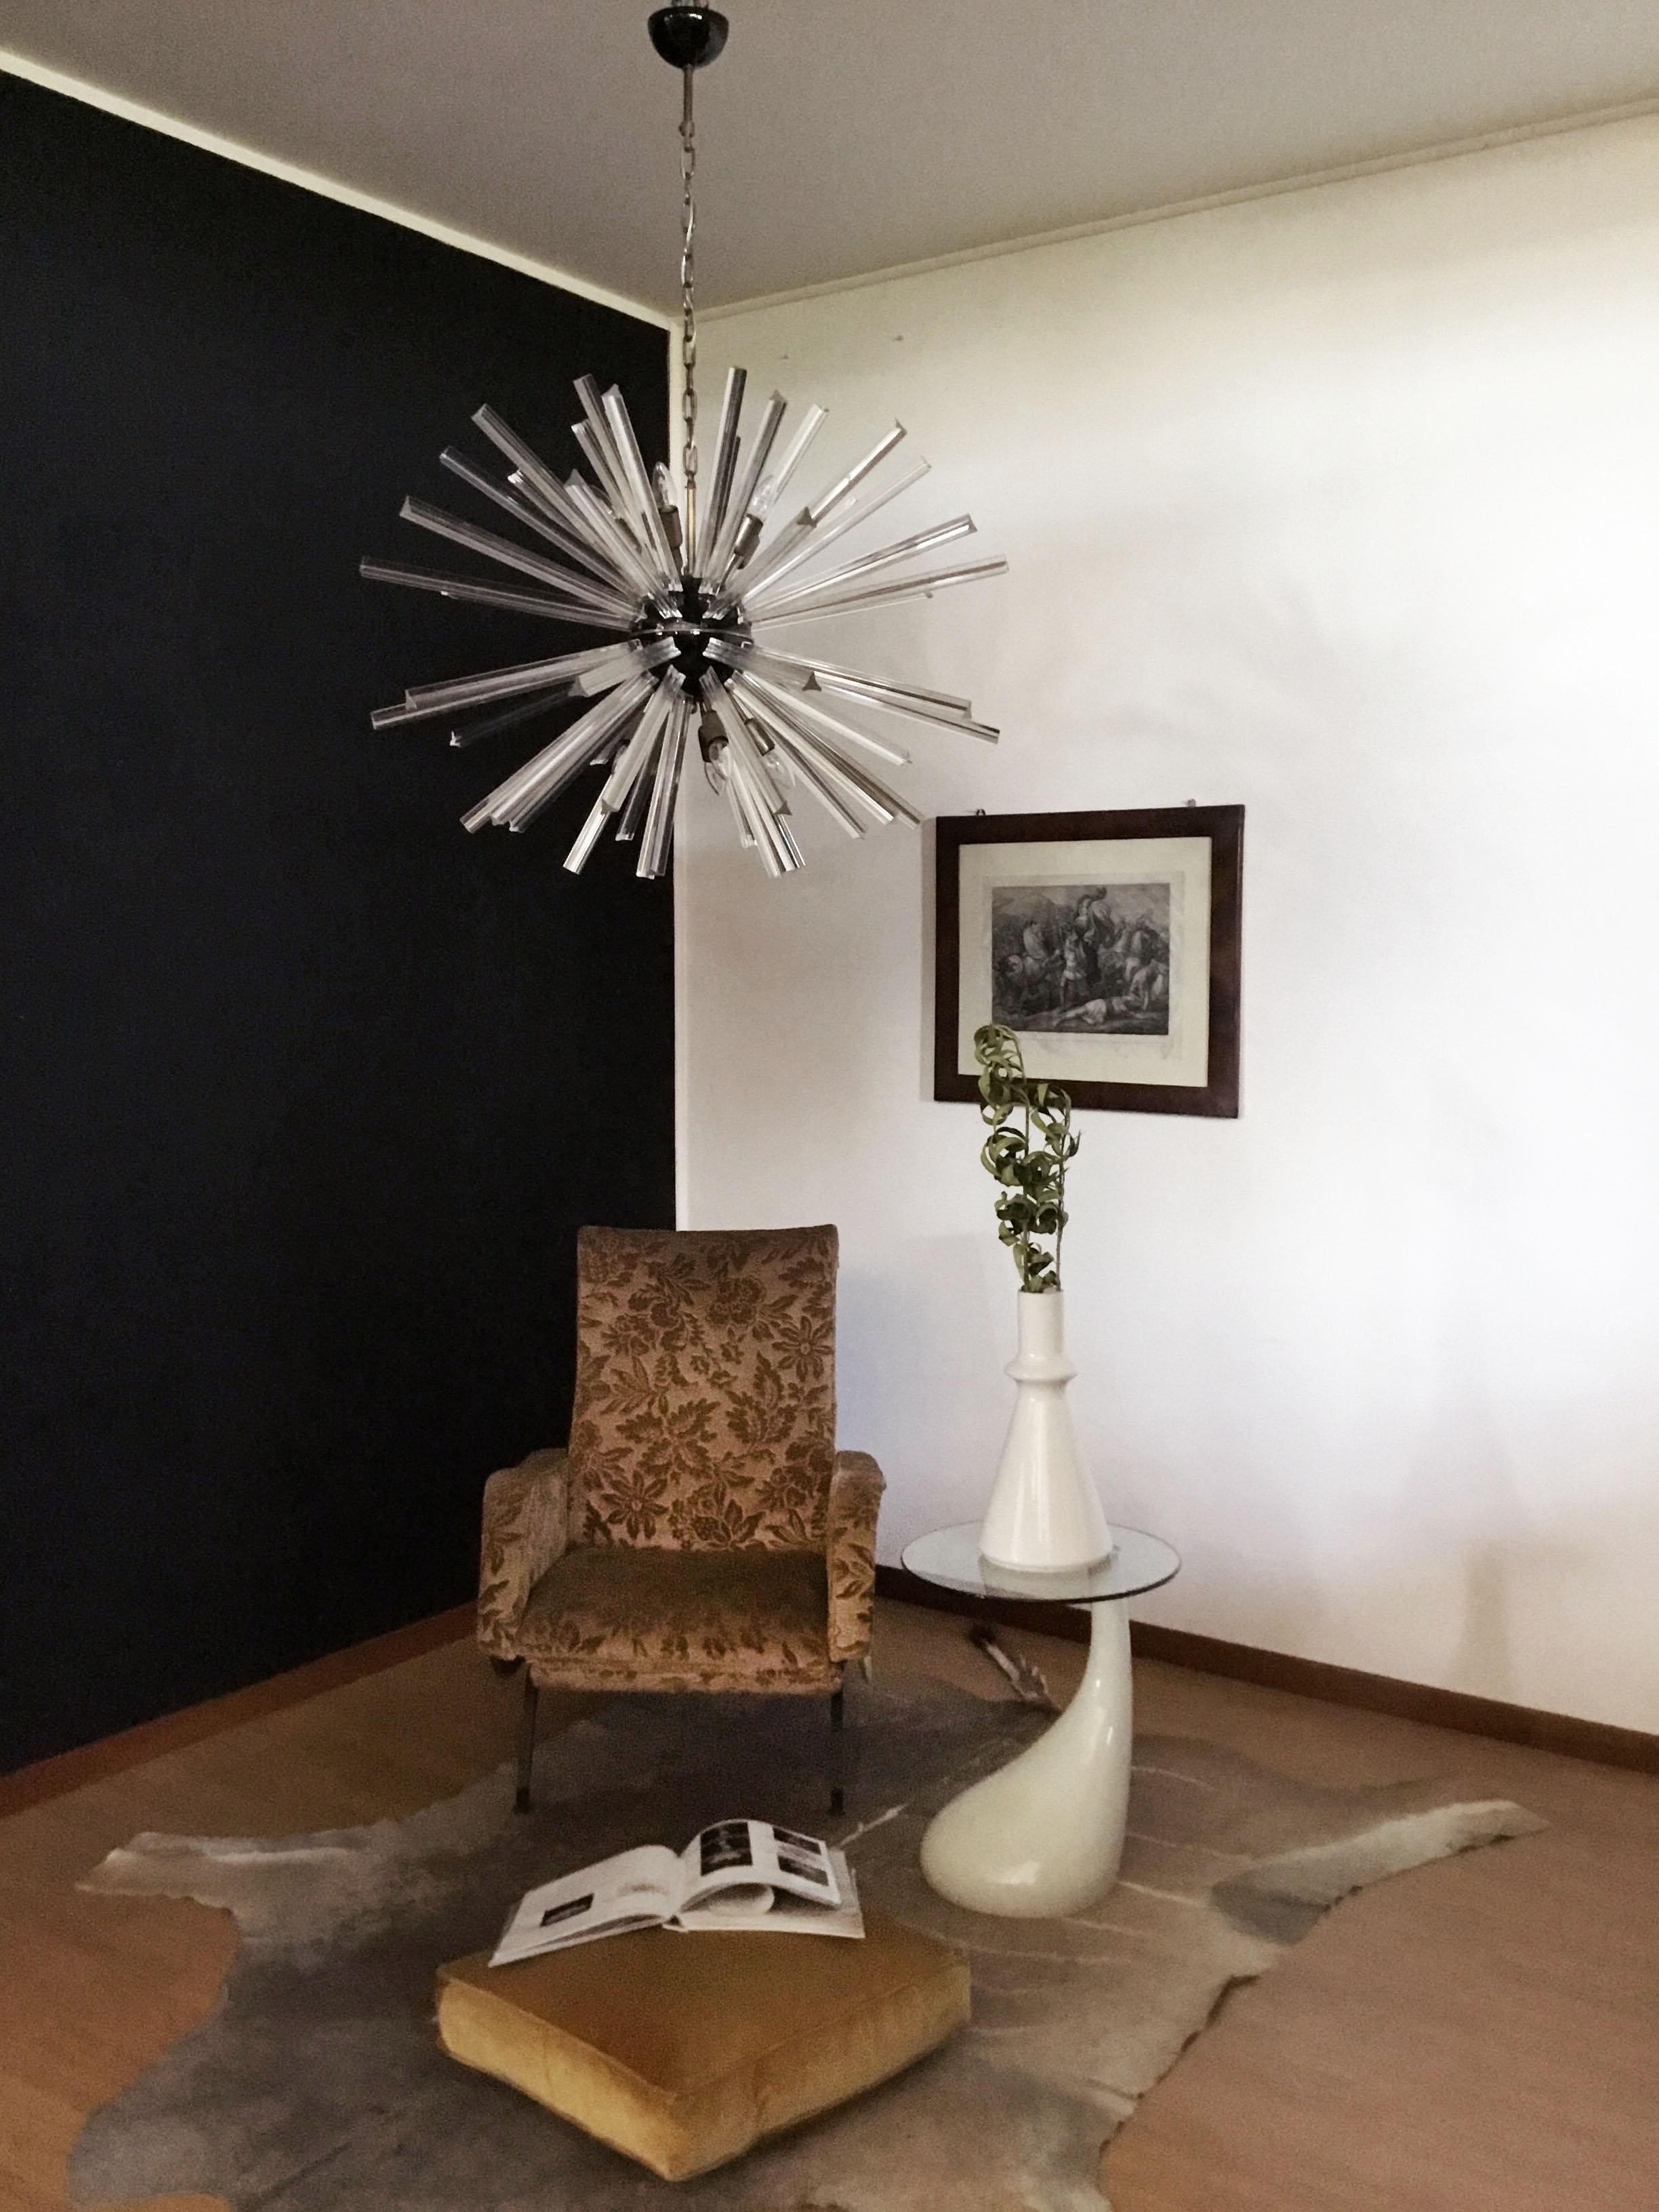 Sputnik chandelier surrounding 50 crystal glass 'triedri' prisms radiating from a center black metal nucleus. Brass lamp holder.
Period: late 20th century
Dimensions: 51,20 inches (130 cm) height with chain; 27,55 inches (70 cm) height without